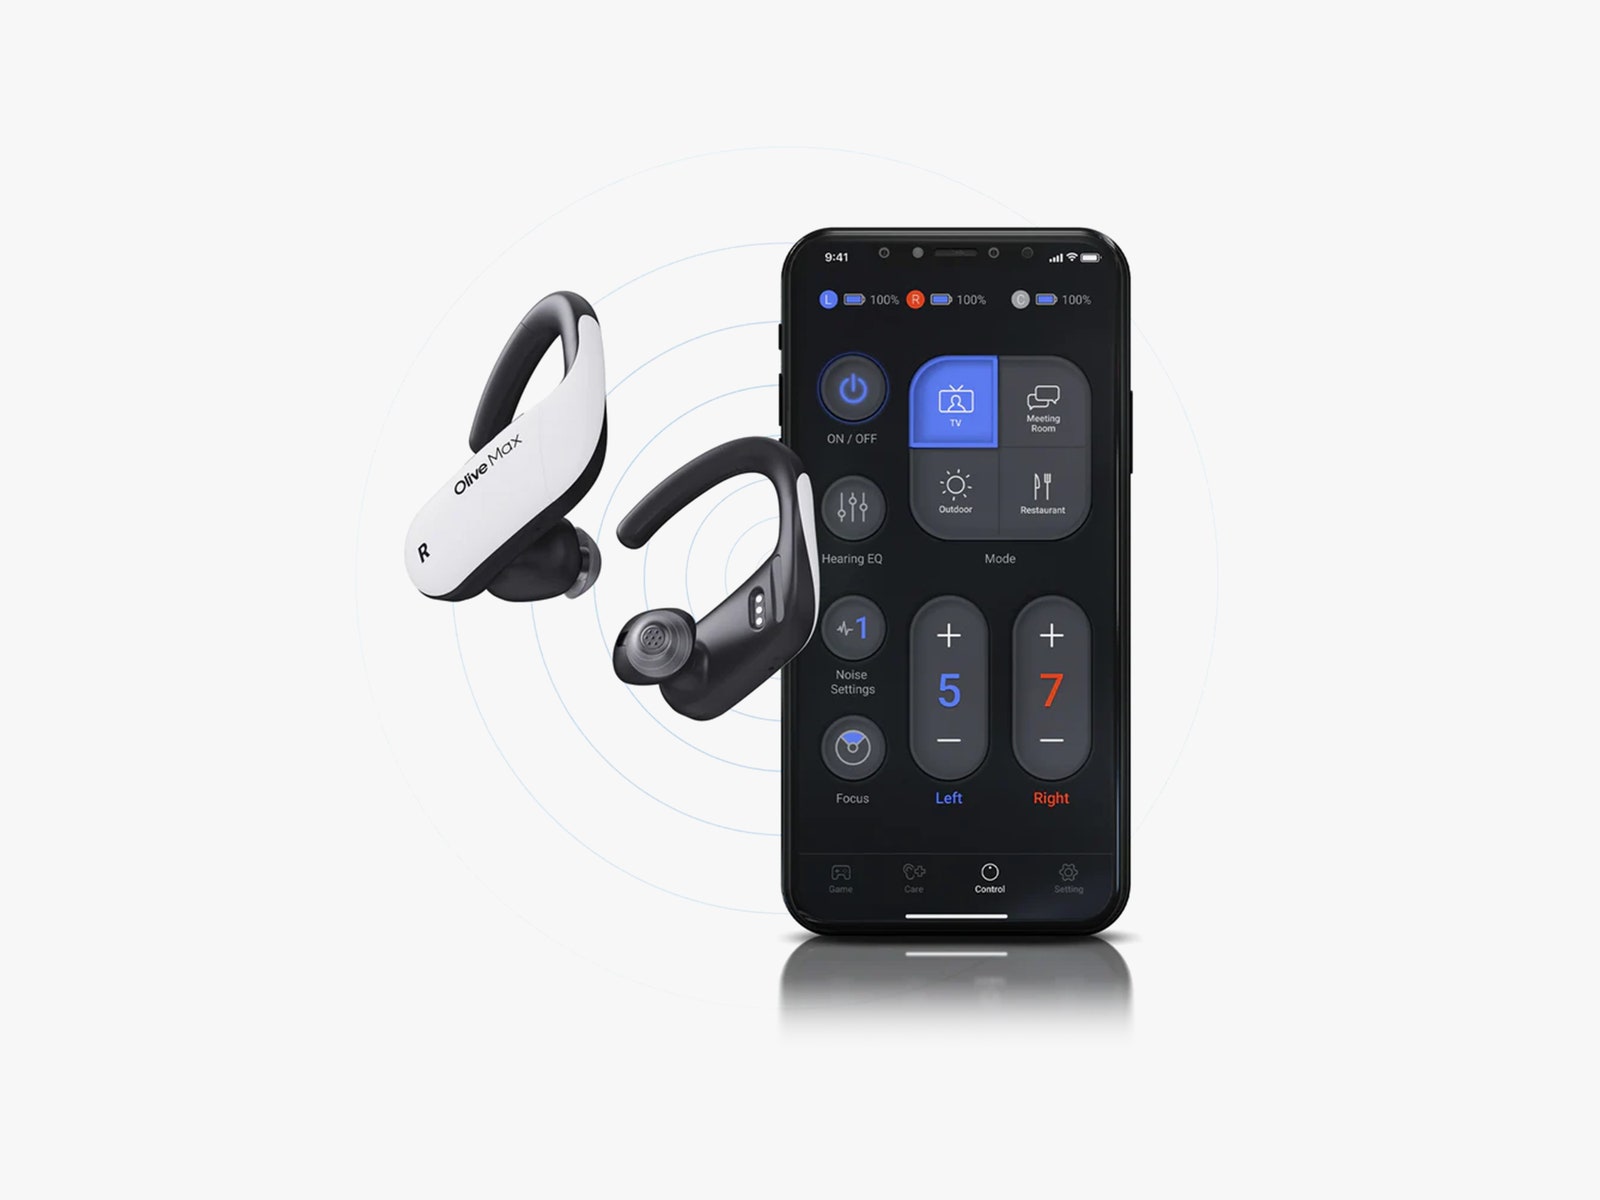 2 over-ear headphones floating next to a mobile device with a screen showing the headphone settings